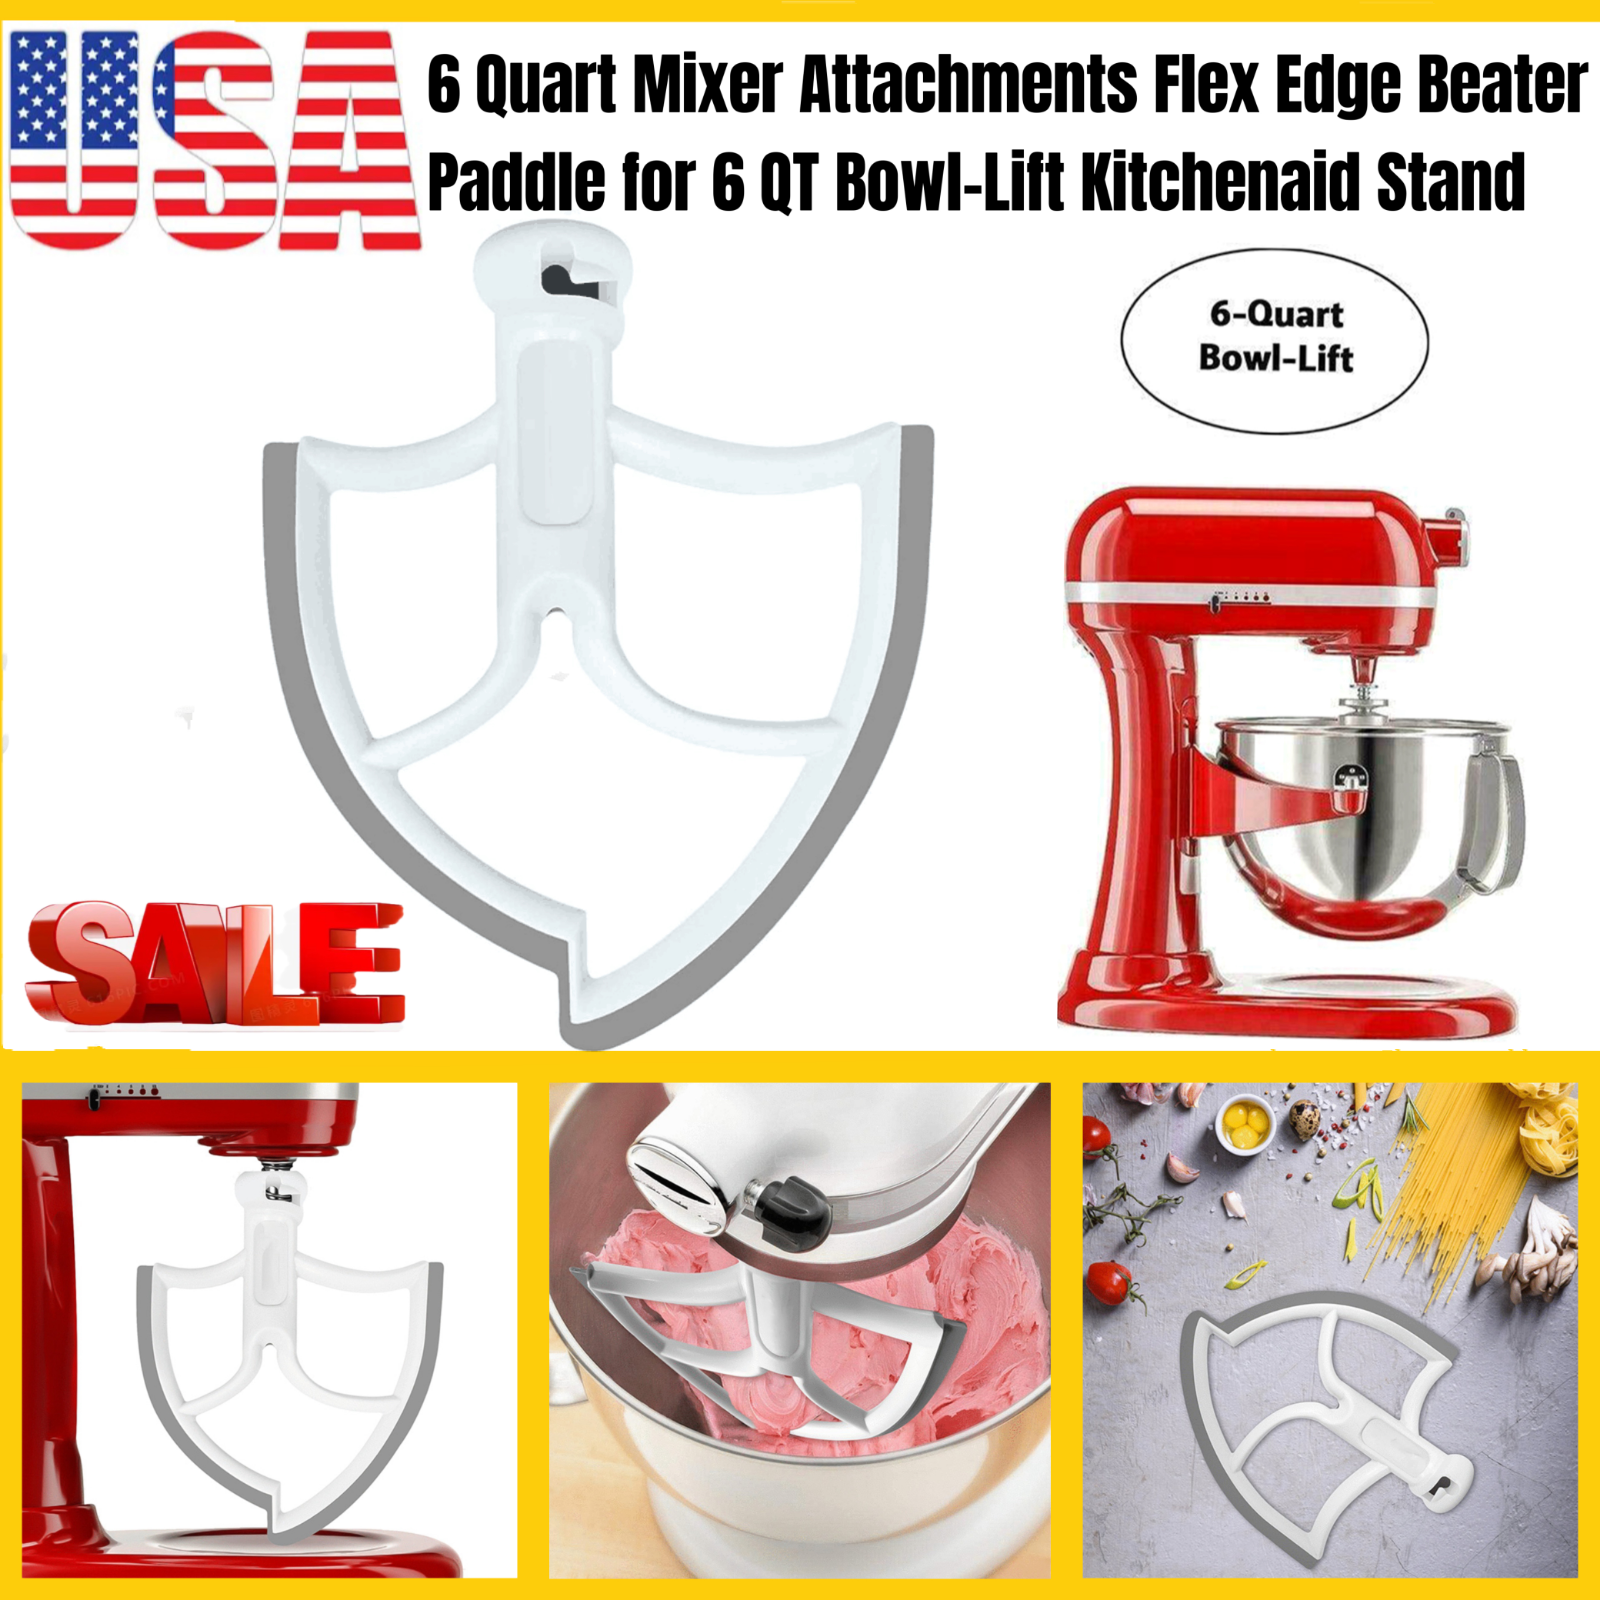 Attachments Flex Edge Beater Paddle For 6 Qt Bowl Lift Stand